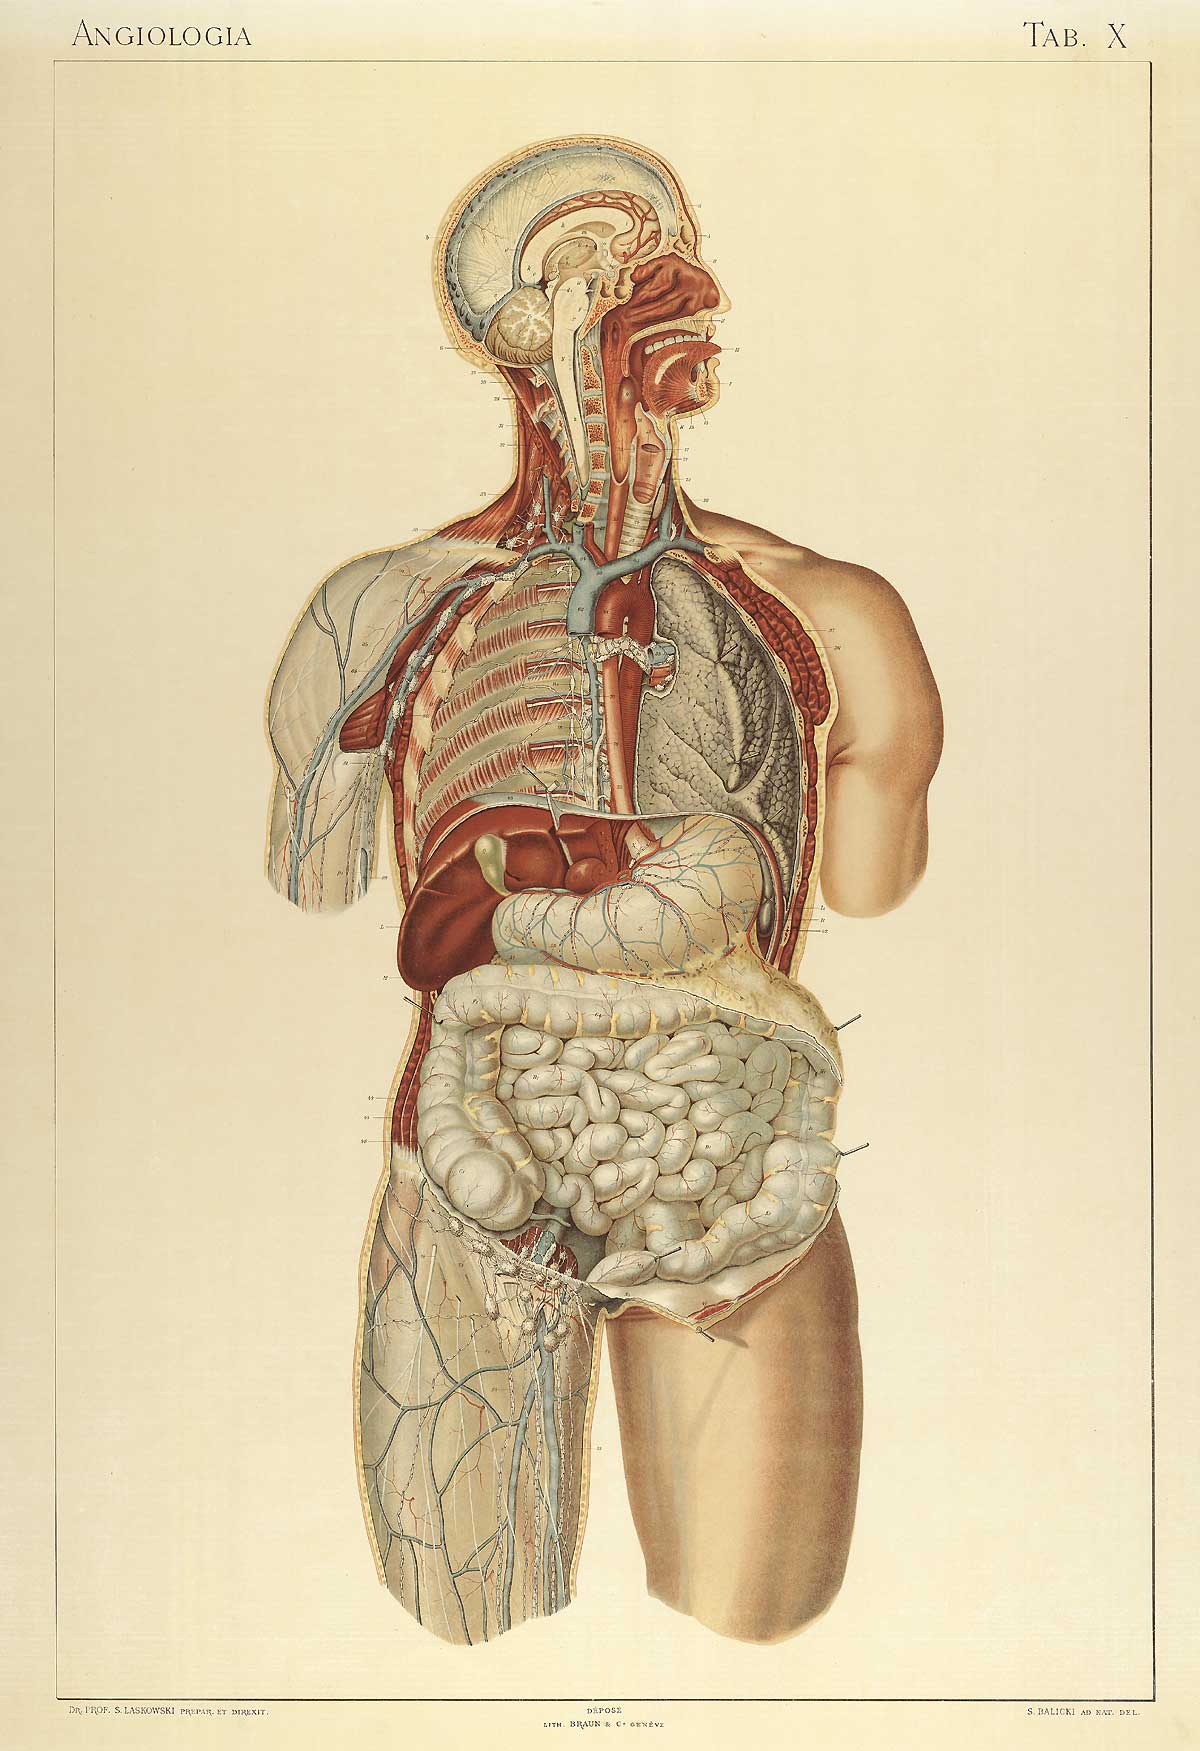 Plate 10 of Sigismond Laskowski's Anatomie normale du corps humain, featuring an exterior view of the circulatory system of the body from head to mid-thigh.